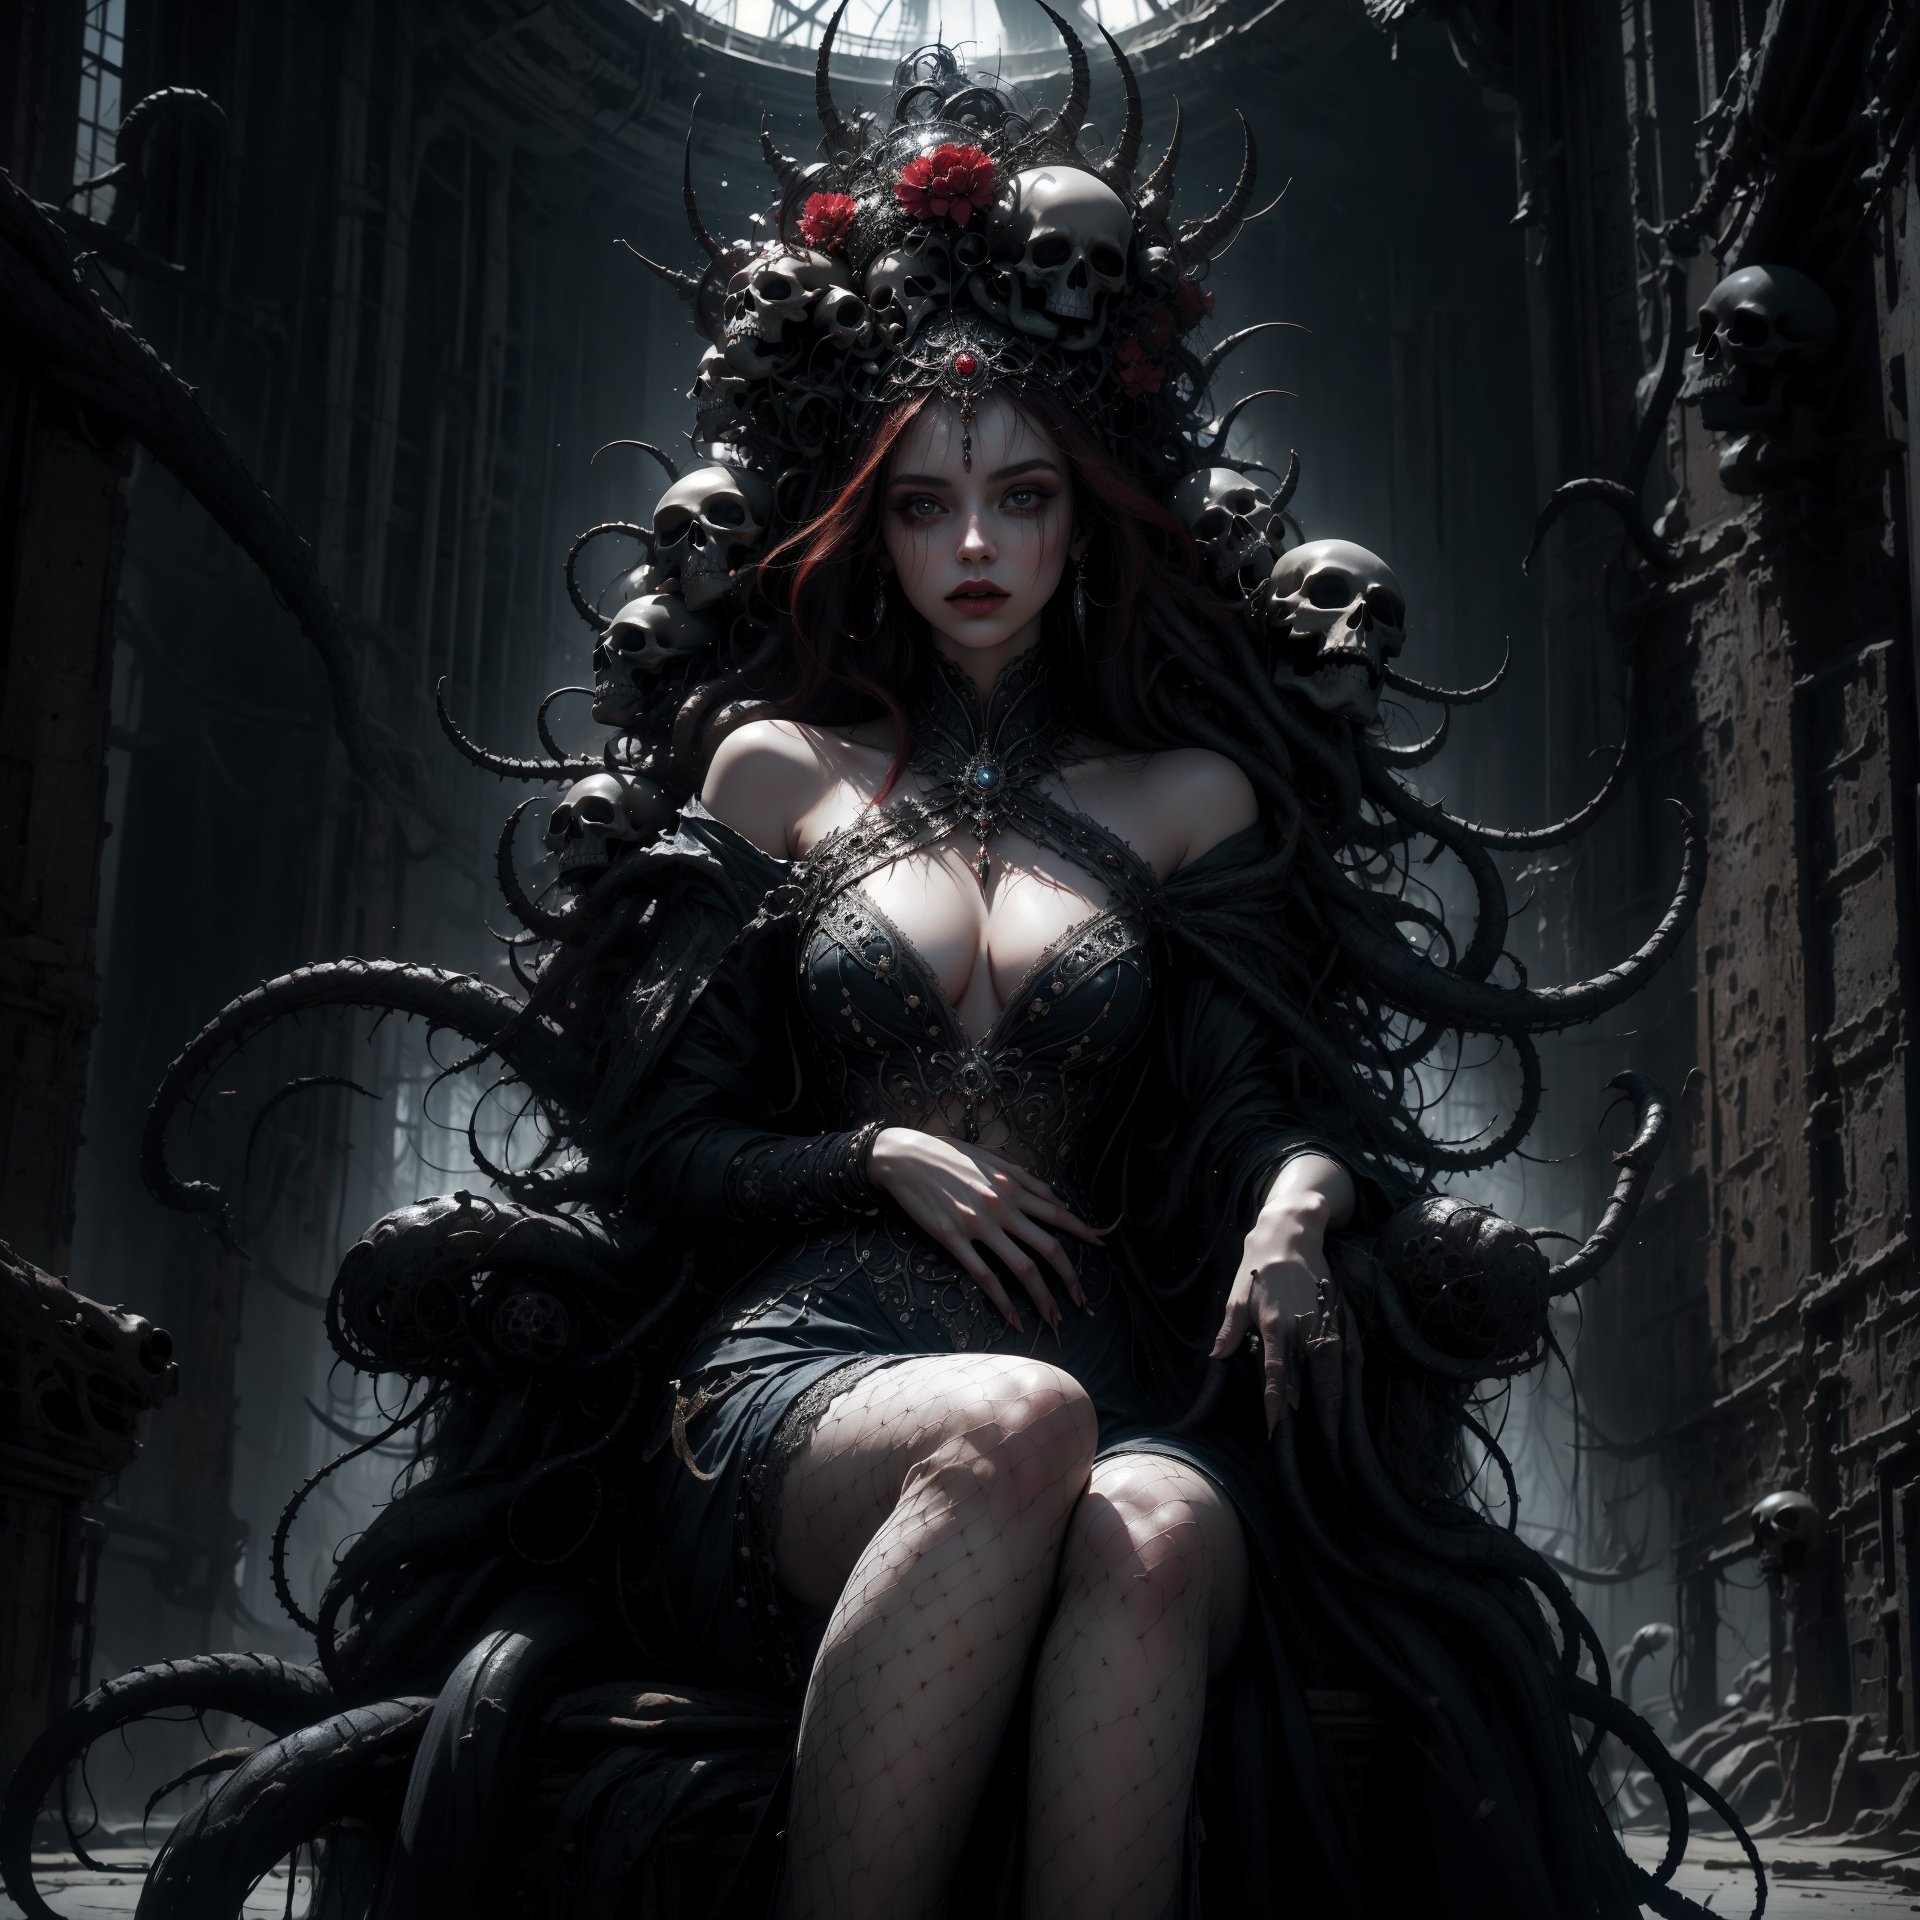 A surreal throne room portrait: a lithe model, adorned with gleaming dreadlocks and shorts hugging toned legs, sits majestically amidst a kaleidoscope of vibrant colors and macabre skulls. Atmospheric lighting highlights every curve and contour as makeup accentuates features. The camera pans across the subject's skin, radiating an otherworldly allure, inviting the viewer to uncover the dark undertones beneath this stunning visual feast.